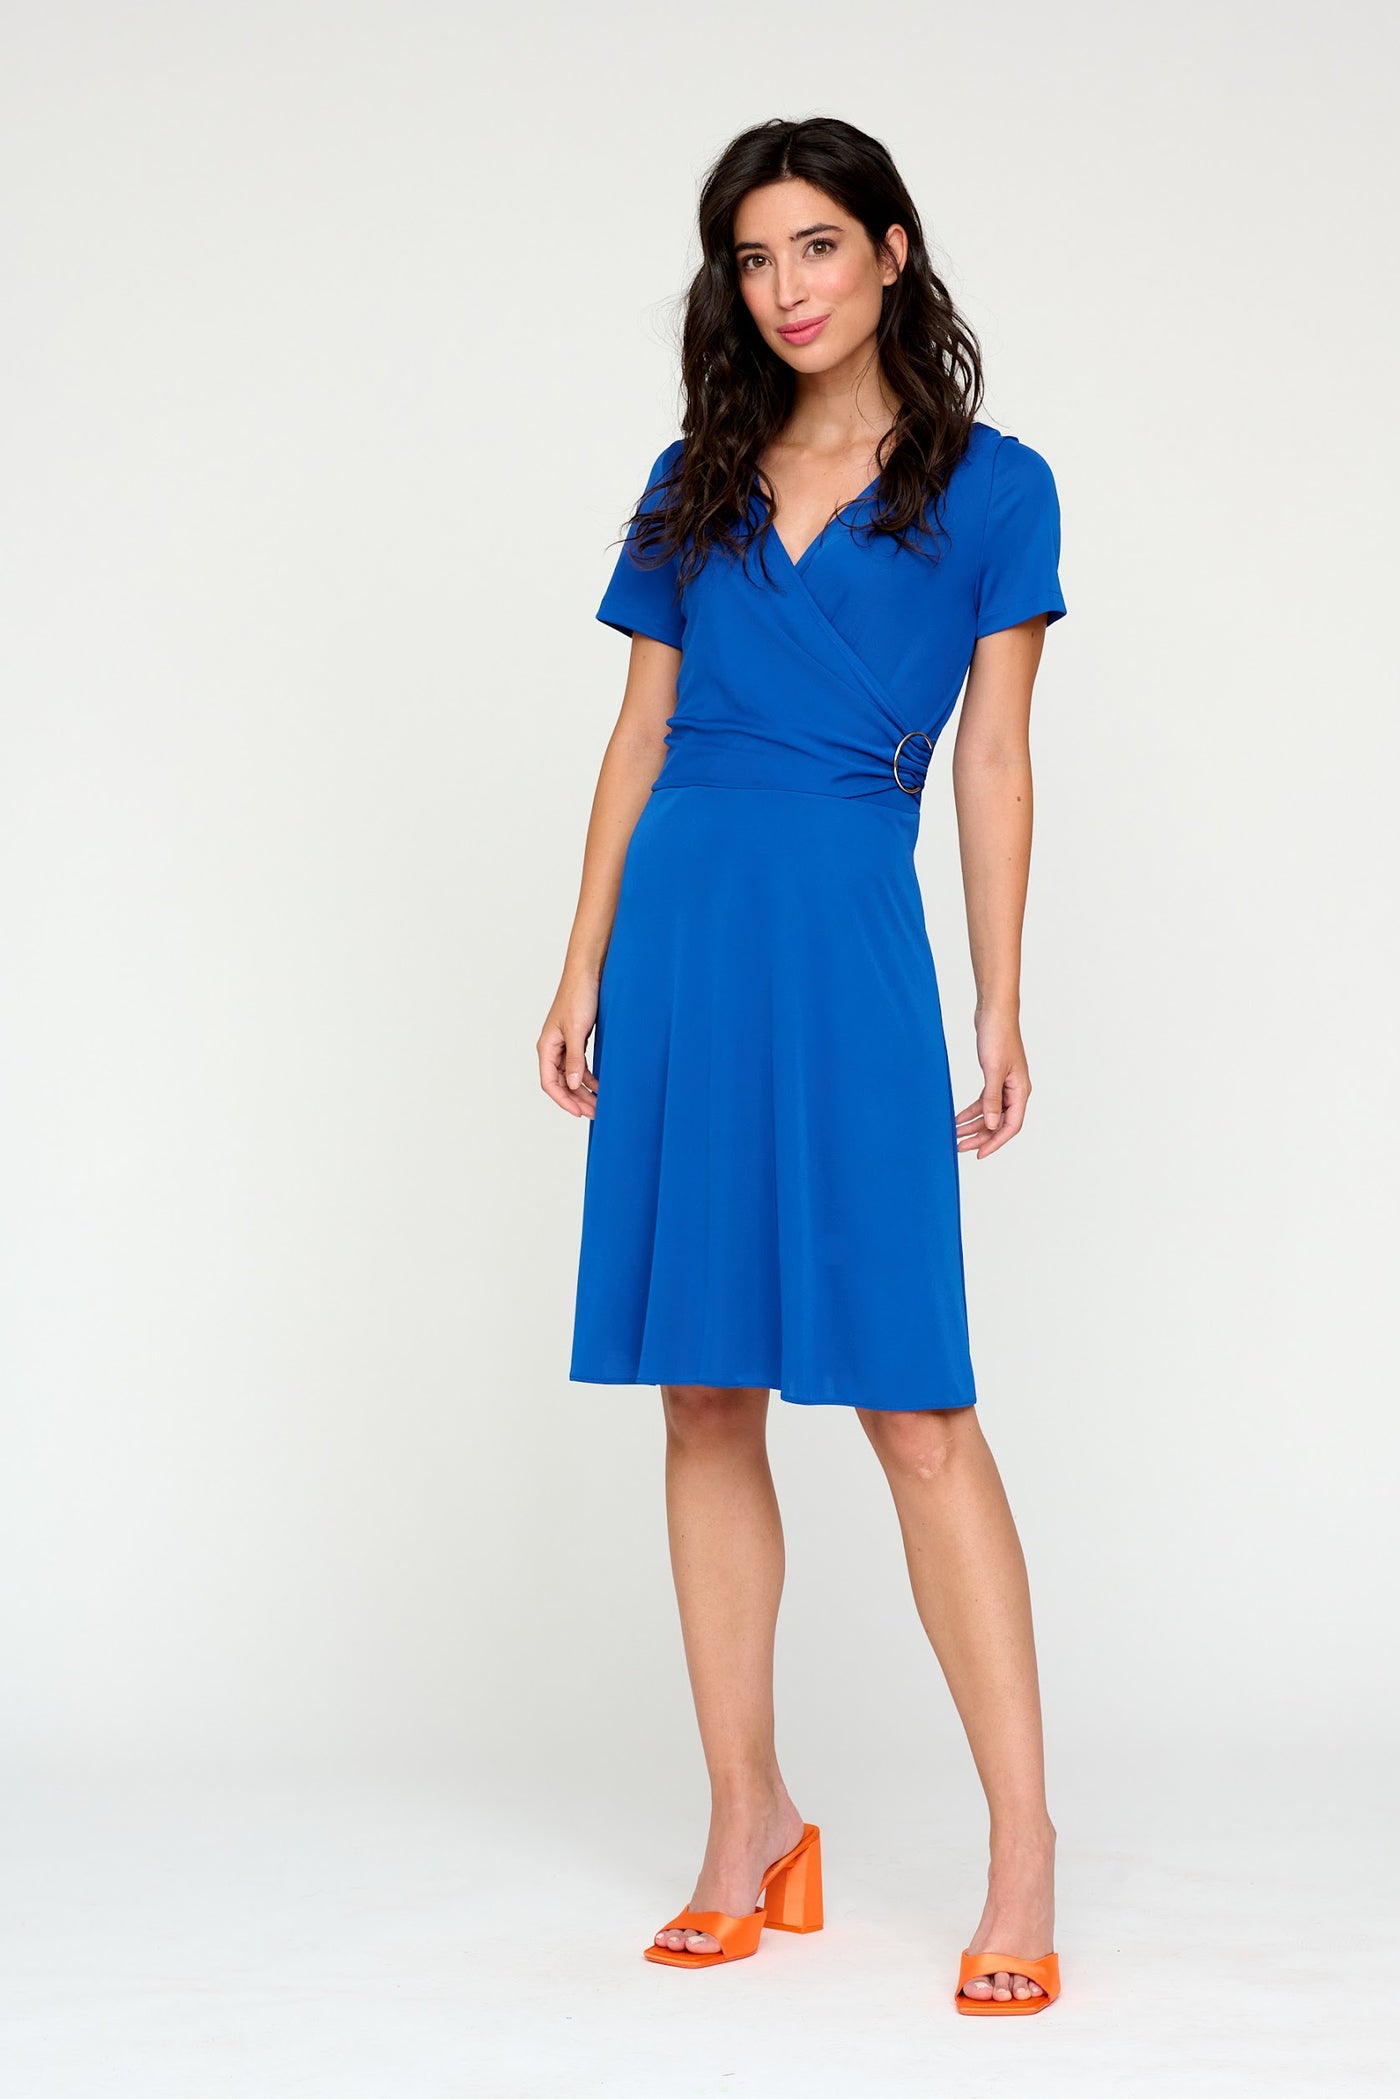 Blue V-Neck Wrap Style Short Sleeve Dress With Buckle Detailing